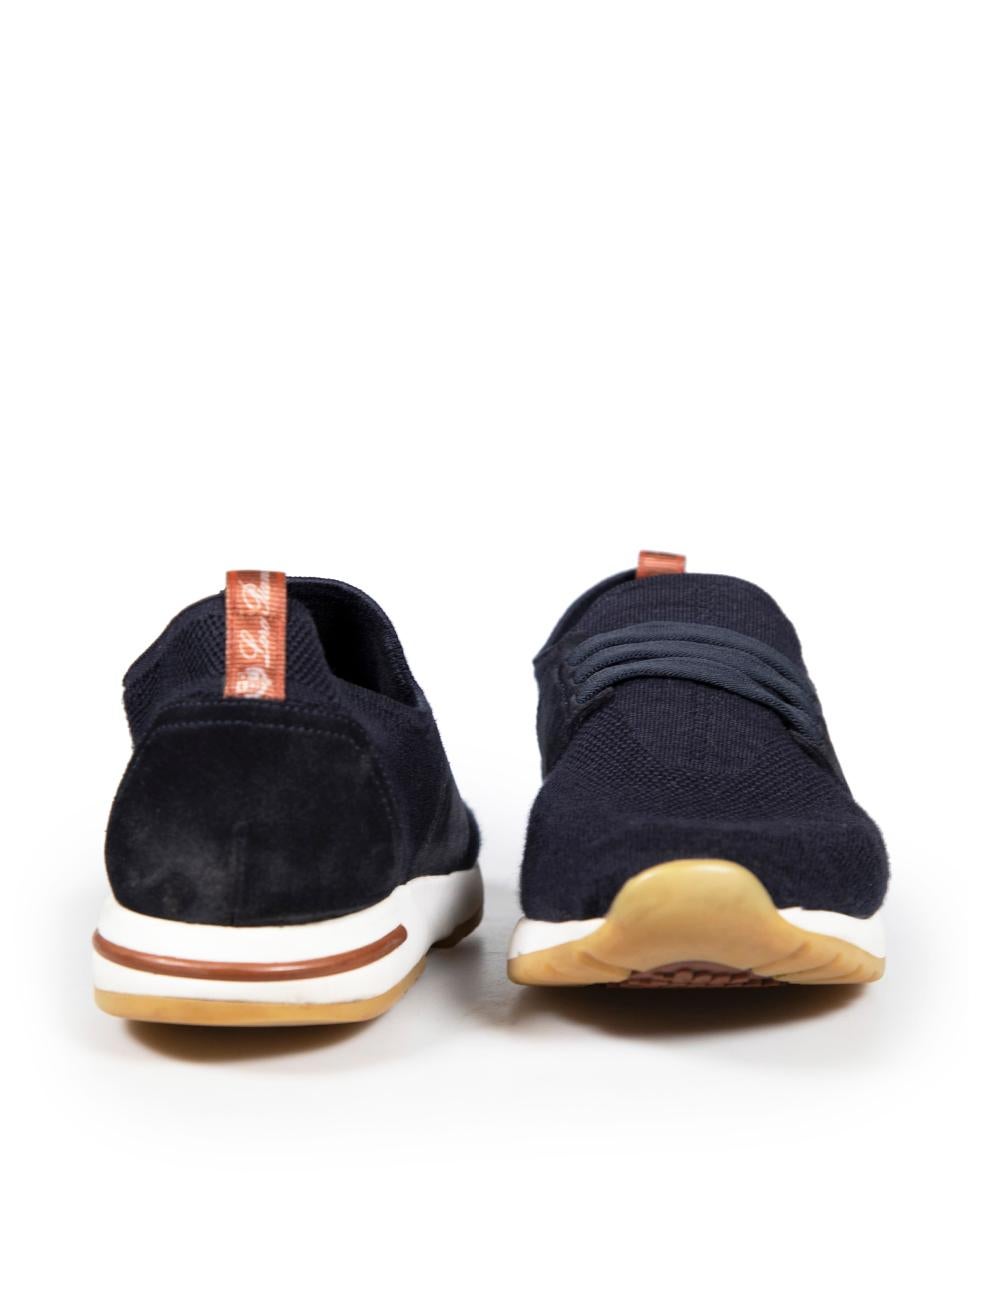 Loro Piana Navy Knit 360 LP Flexy Walk Trainers Size IT 40 In Good Condition For Sale In London, GB